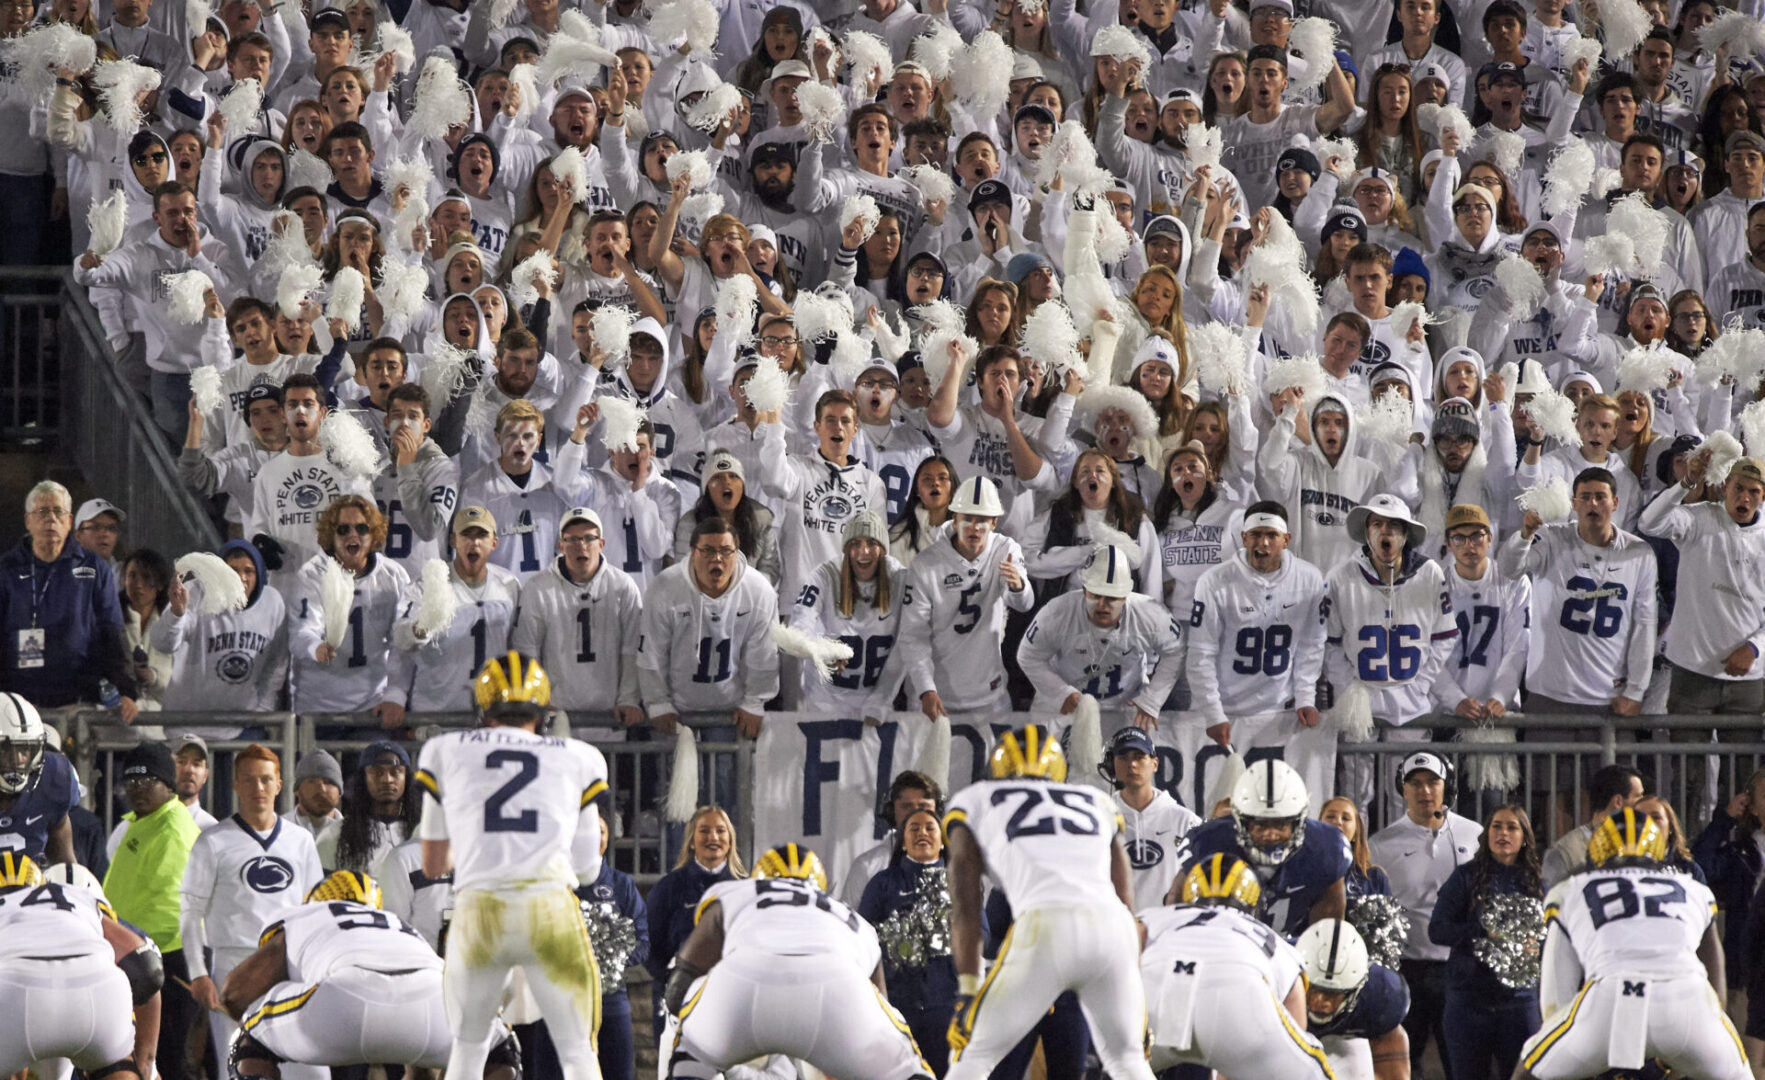 How Did the Penn State White Out Begin and Why do Penn State Fans